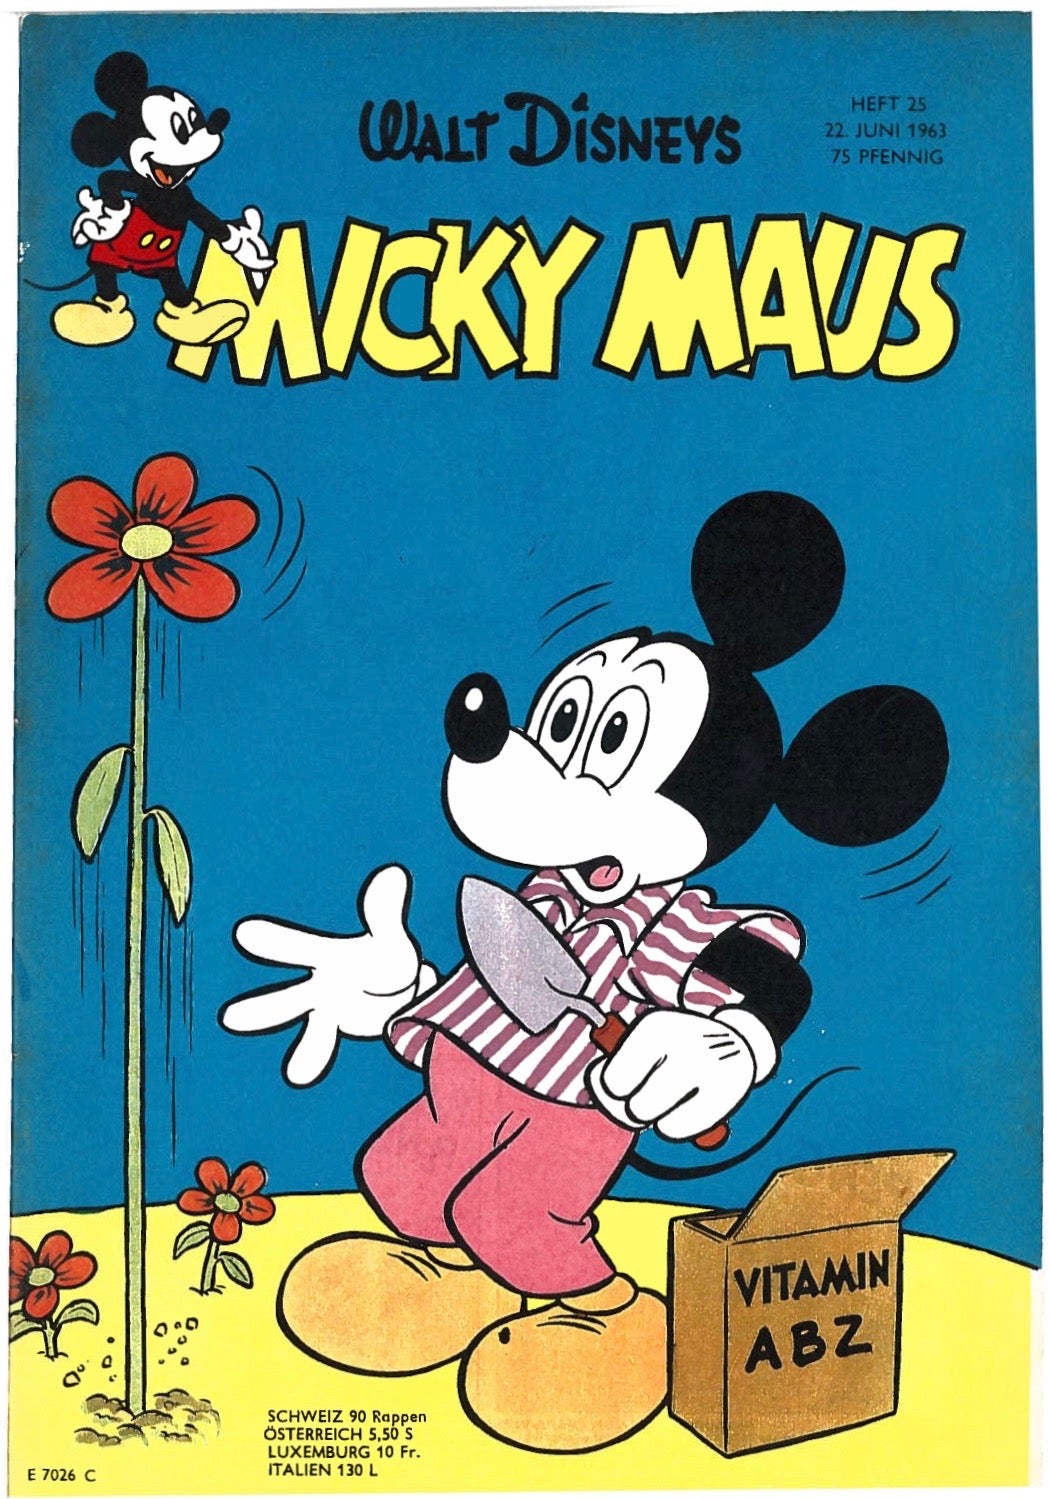 Micky Maus - 1st Edition/1st Printing by Walt Disney on Books Tell You Why,  Inc